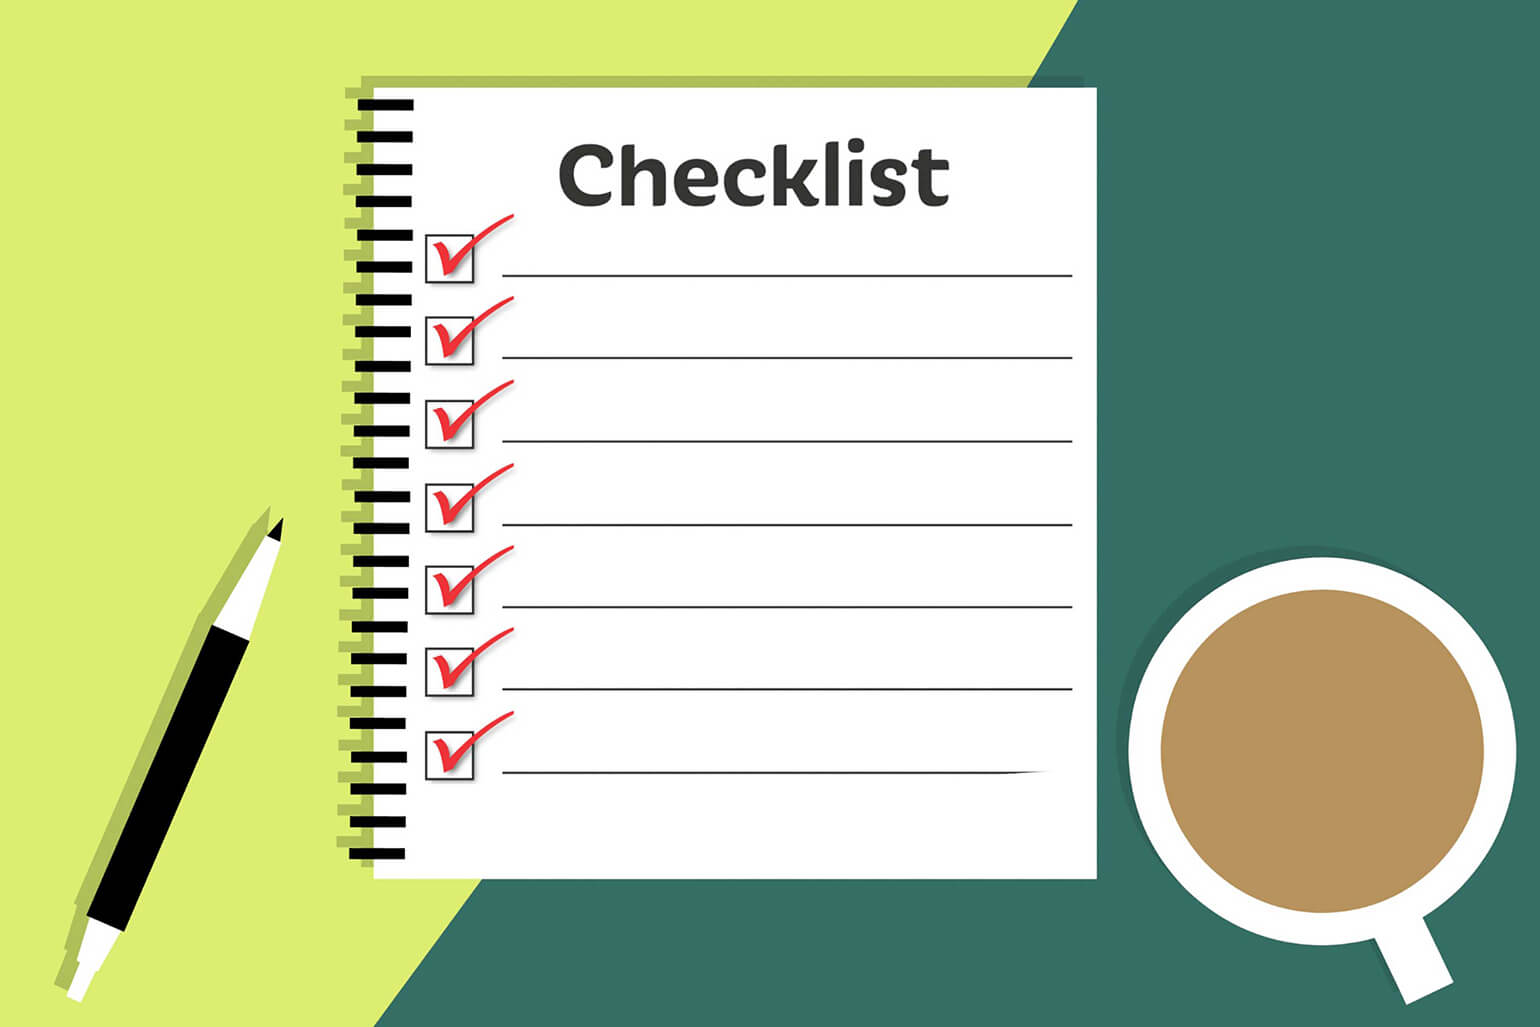 Image of a notebook with a paper on it labeled “Checklist” with little check boxes. Next to the notebook is a pen and cup of coffee..